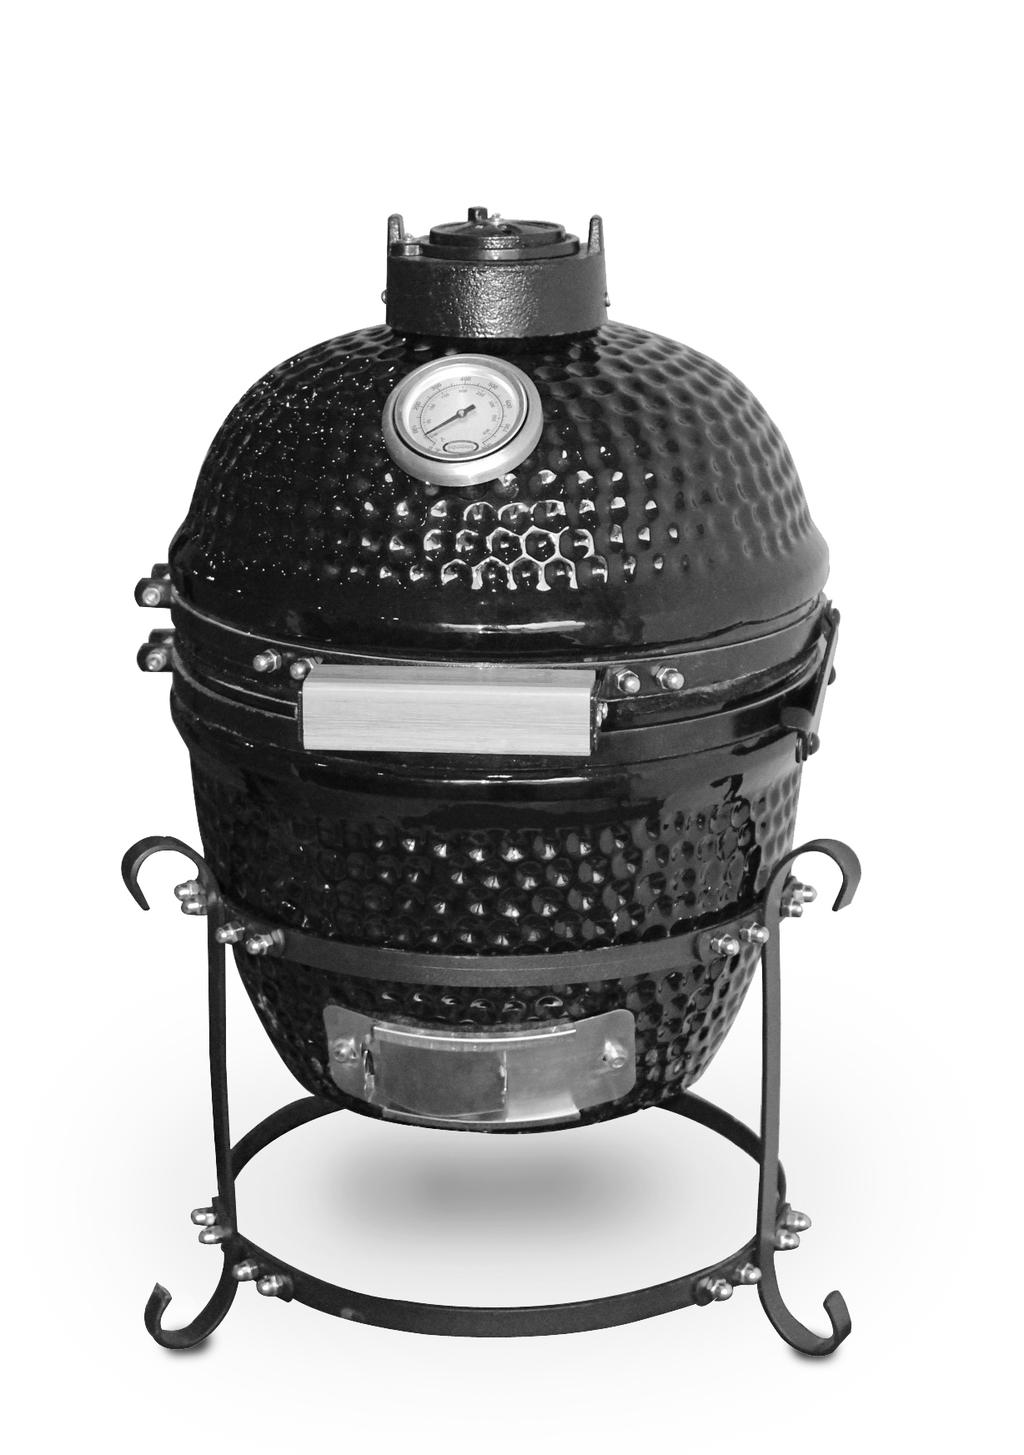 Louisiana Grills Kamado 13 (LG K13) Model # 61130 kamado charcoal BBQ i n s t ru c t i o n m a n ua l PARTS LIST Prior to assembly, check all parts against the parts list.